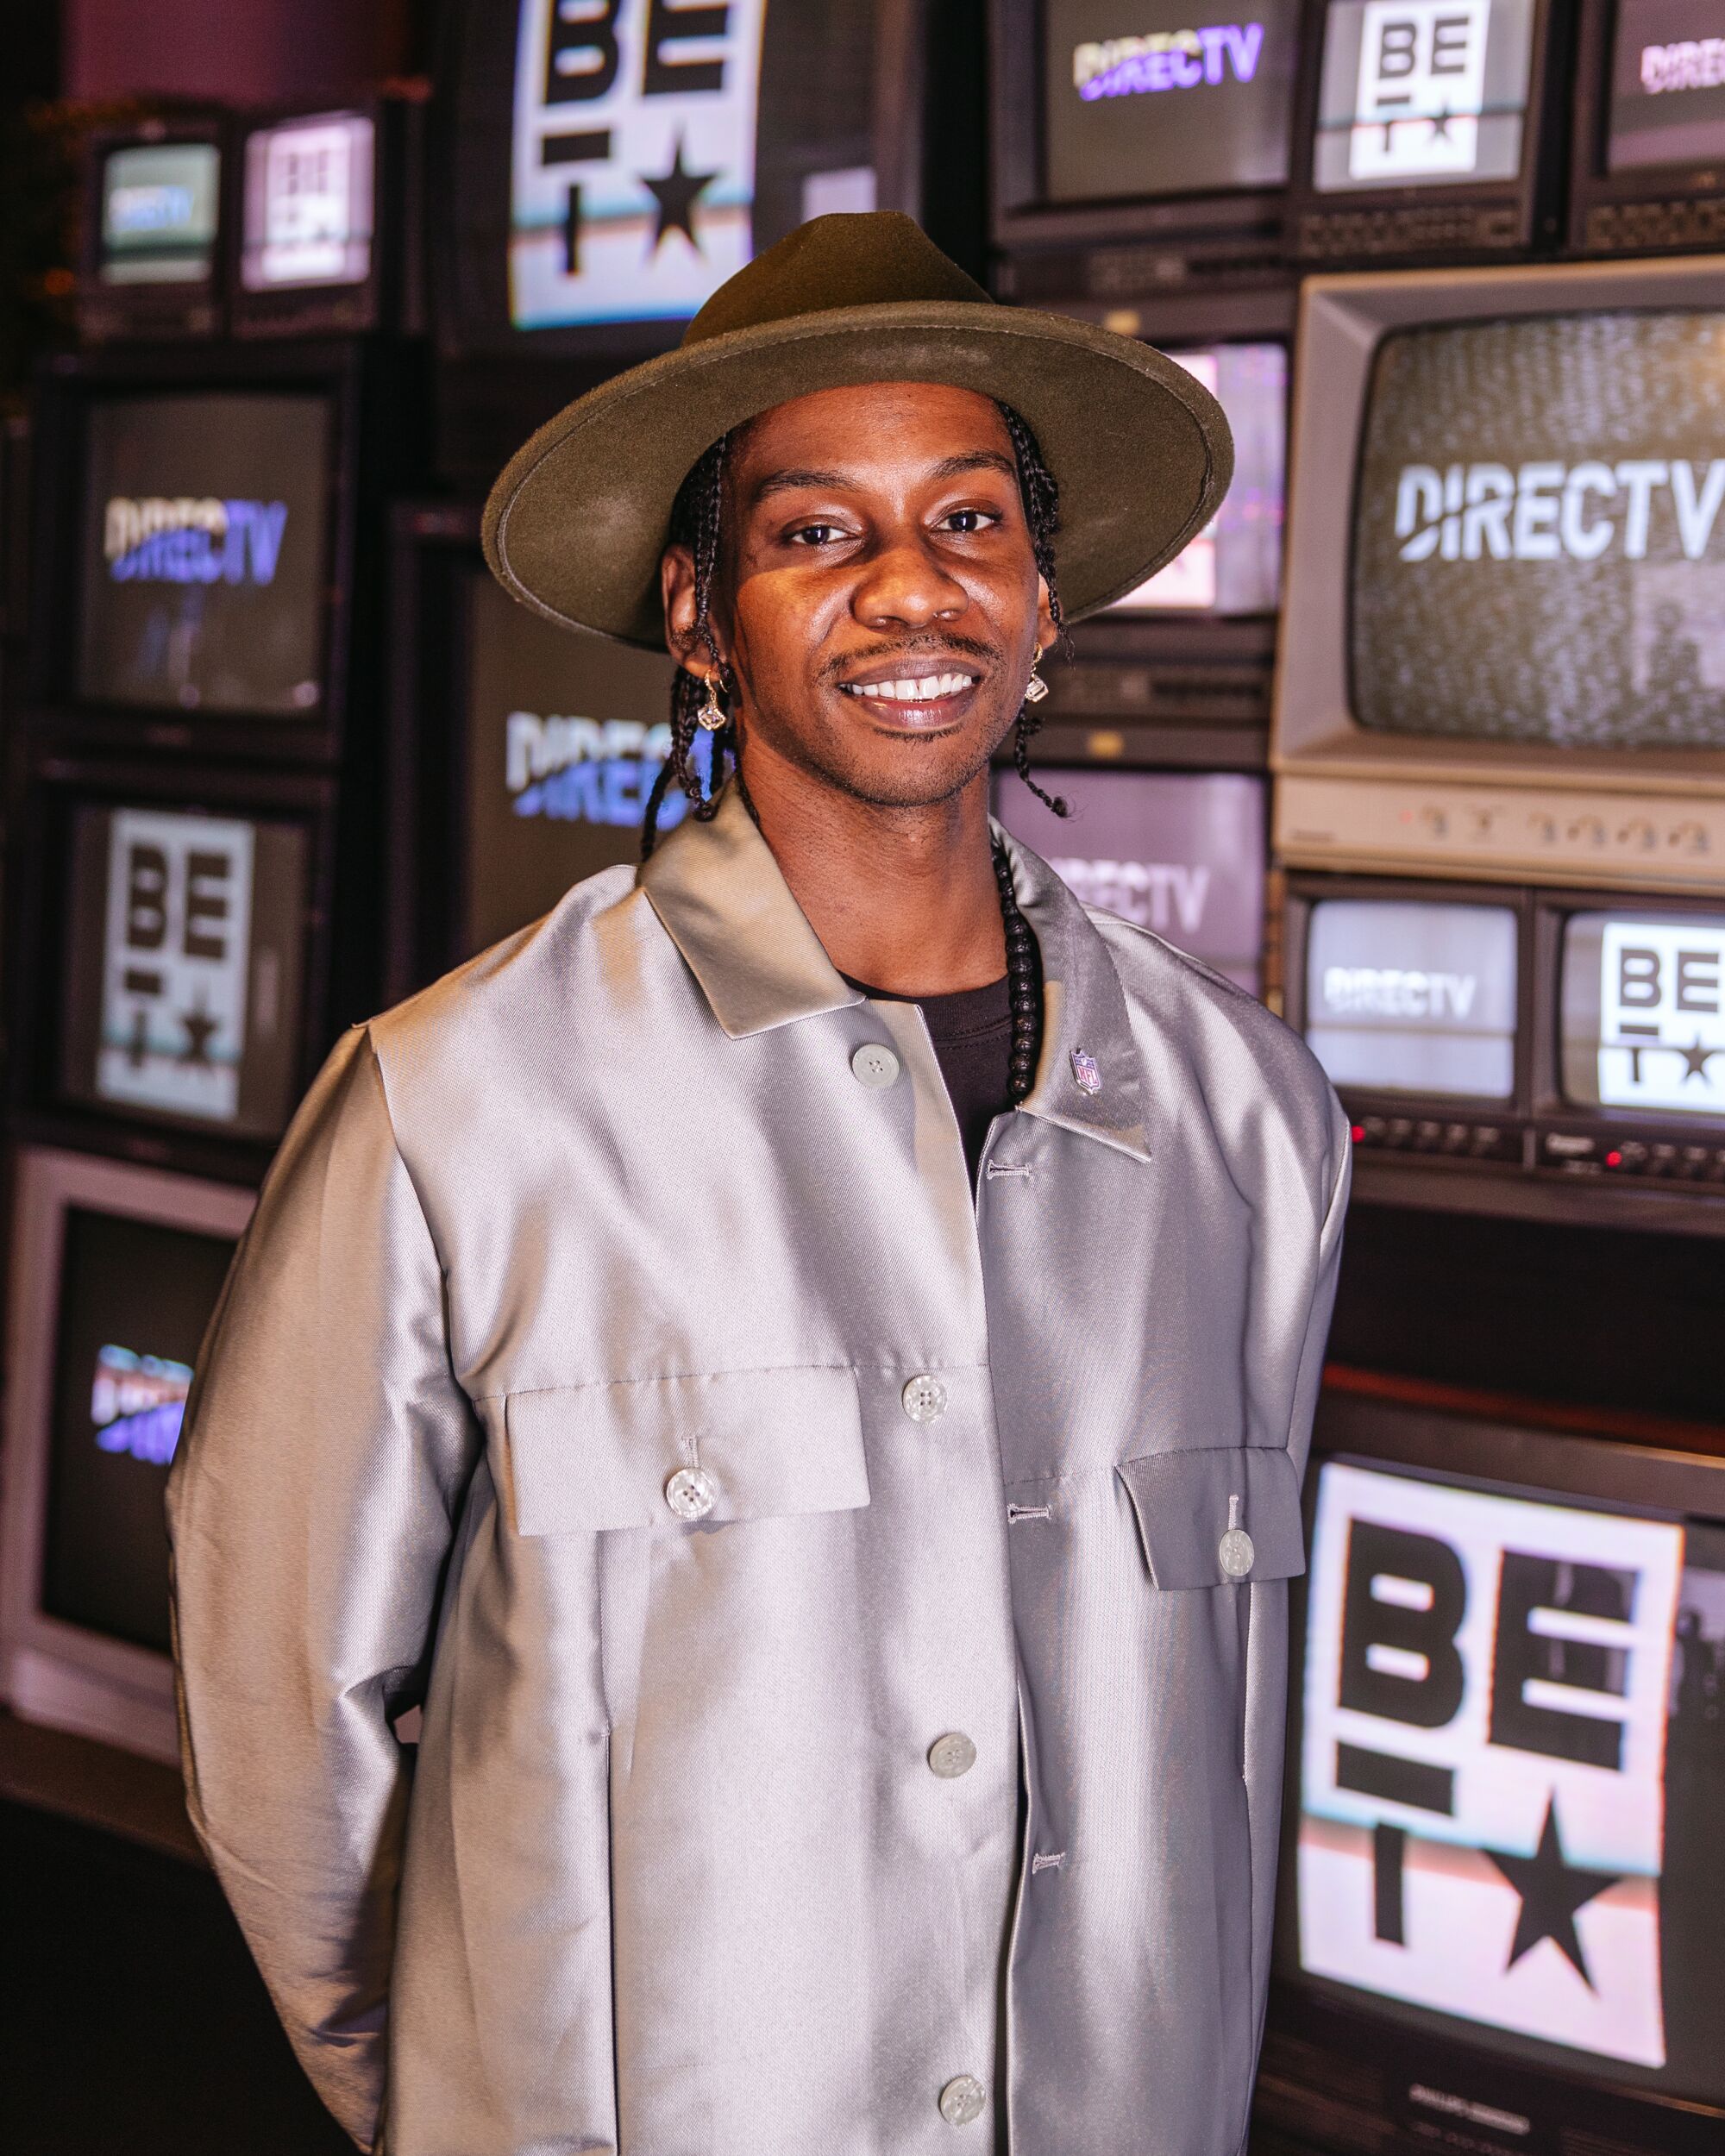 A man in a loose, long-sleeve silver shirt and brown hat poses for a portrait in front of TVs.